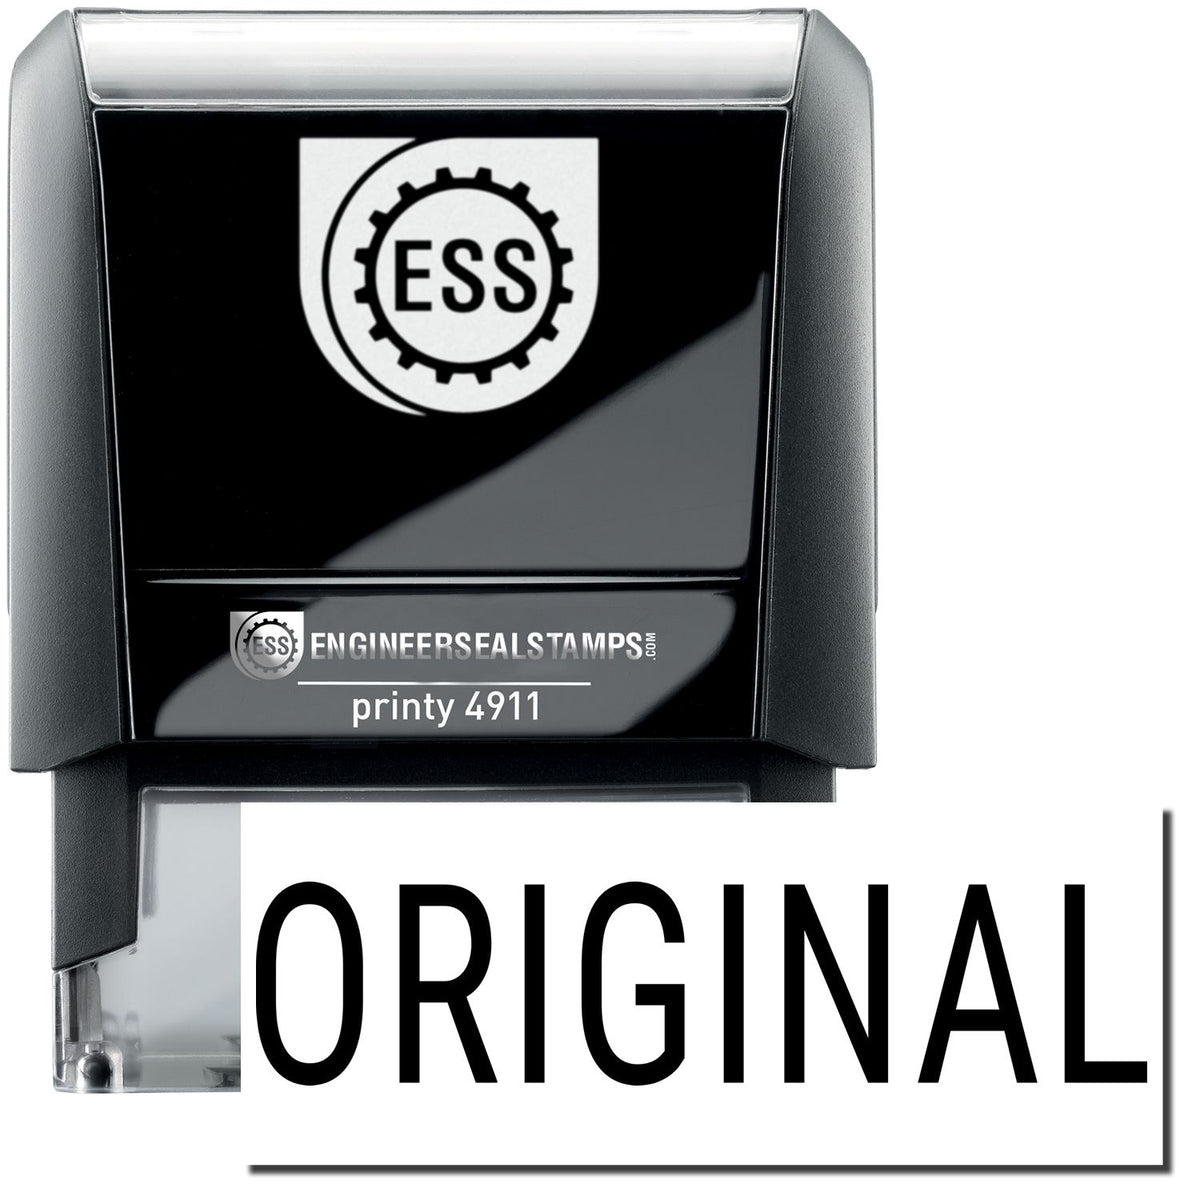 A self-inking stamp with a stamped image showing how the text &quot;ORIGINAL&quot; in a narrow font is displayed after stamping.